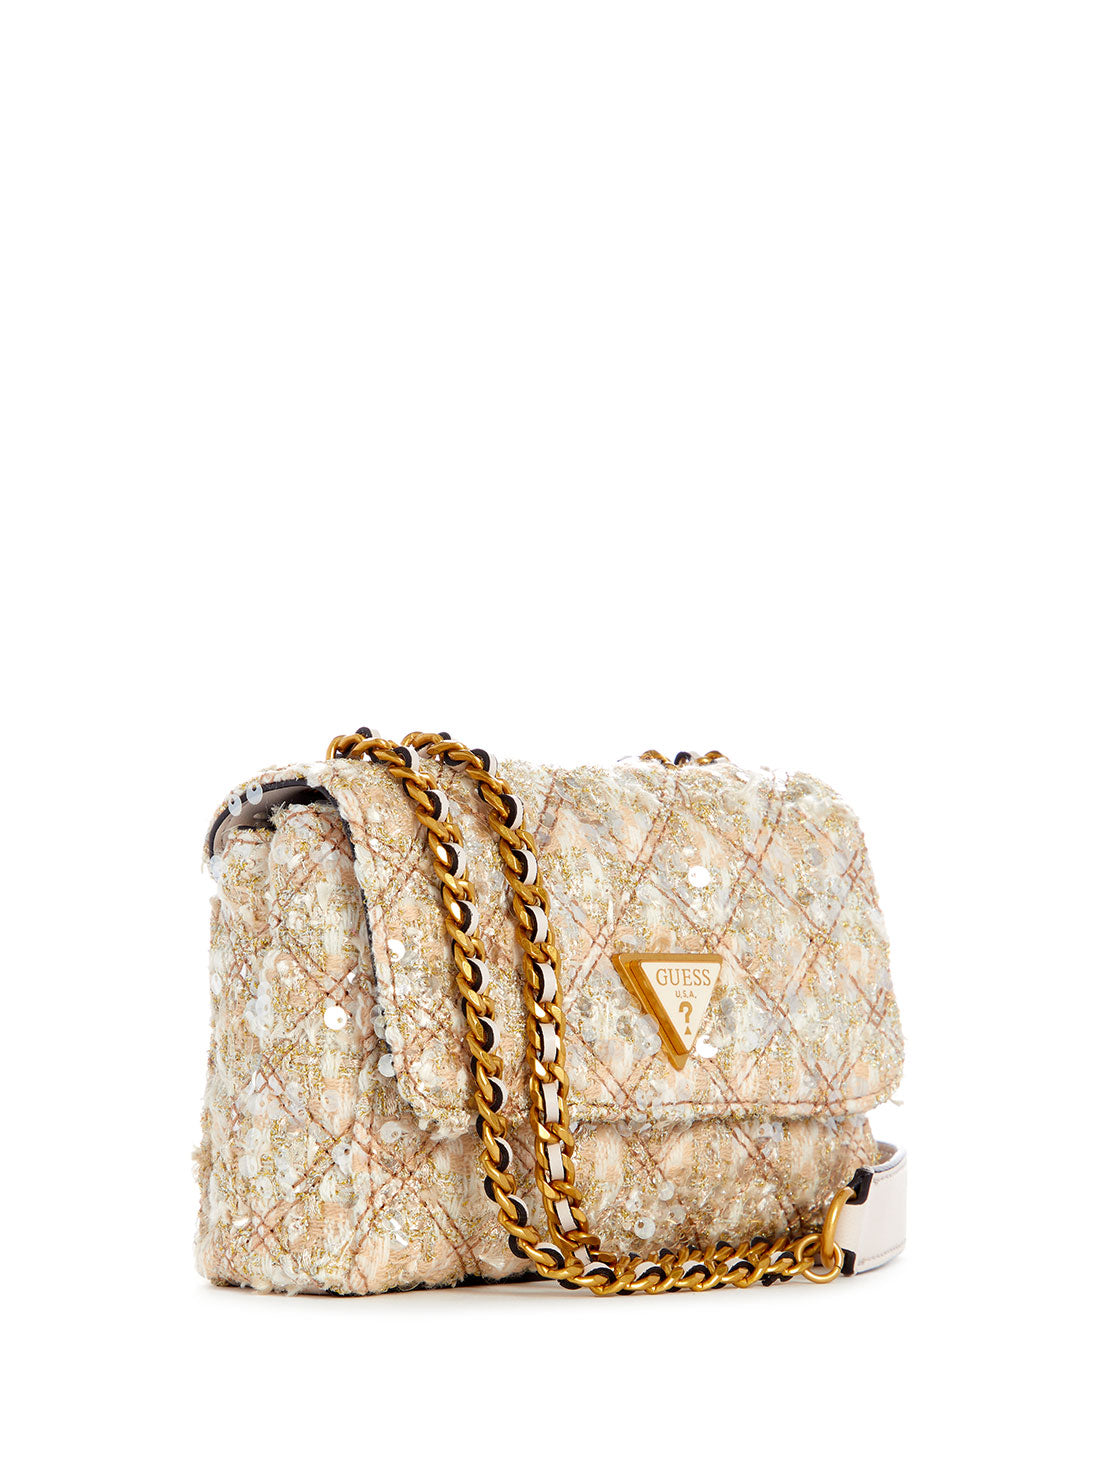 GUESS Gold Giully Mini Crossbody Bag side view